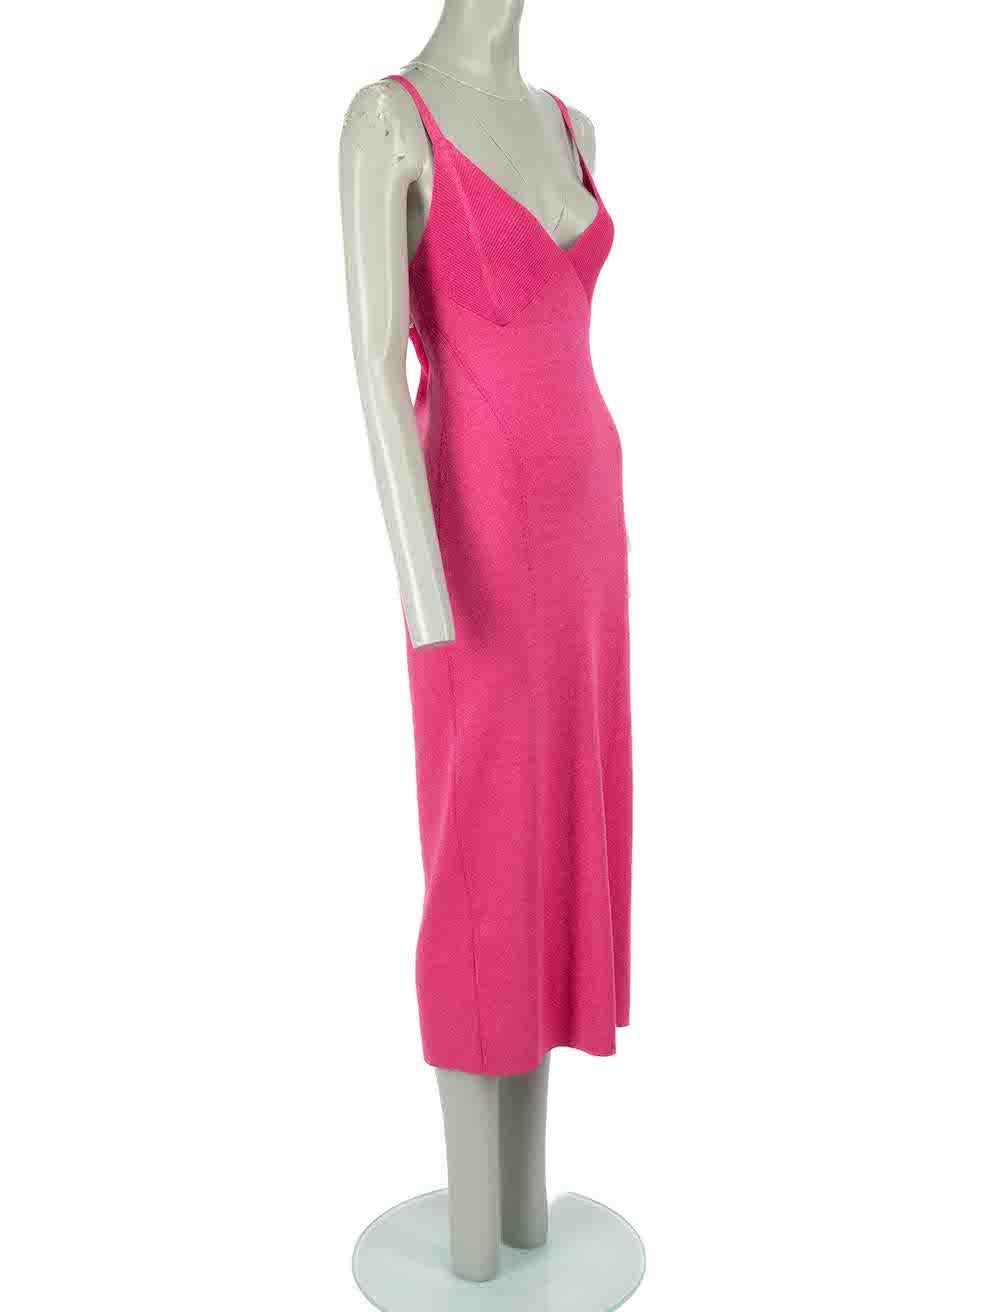 CONDITION is Never worn. No visible wear to dress is evident on this new STAUD designer resale item
 
 Details
 Hot pink
 Viscose
 Dress
 Metallic thread
 Sleeveless
 V-neck
 Midi
 Figure hugging fit
 Midi
 
 
 Made in China
 
 Composition
 50%